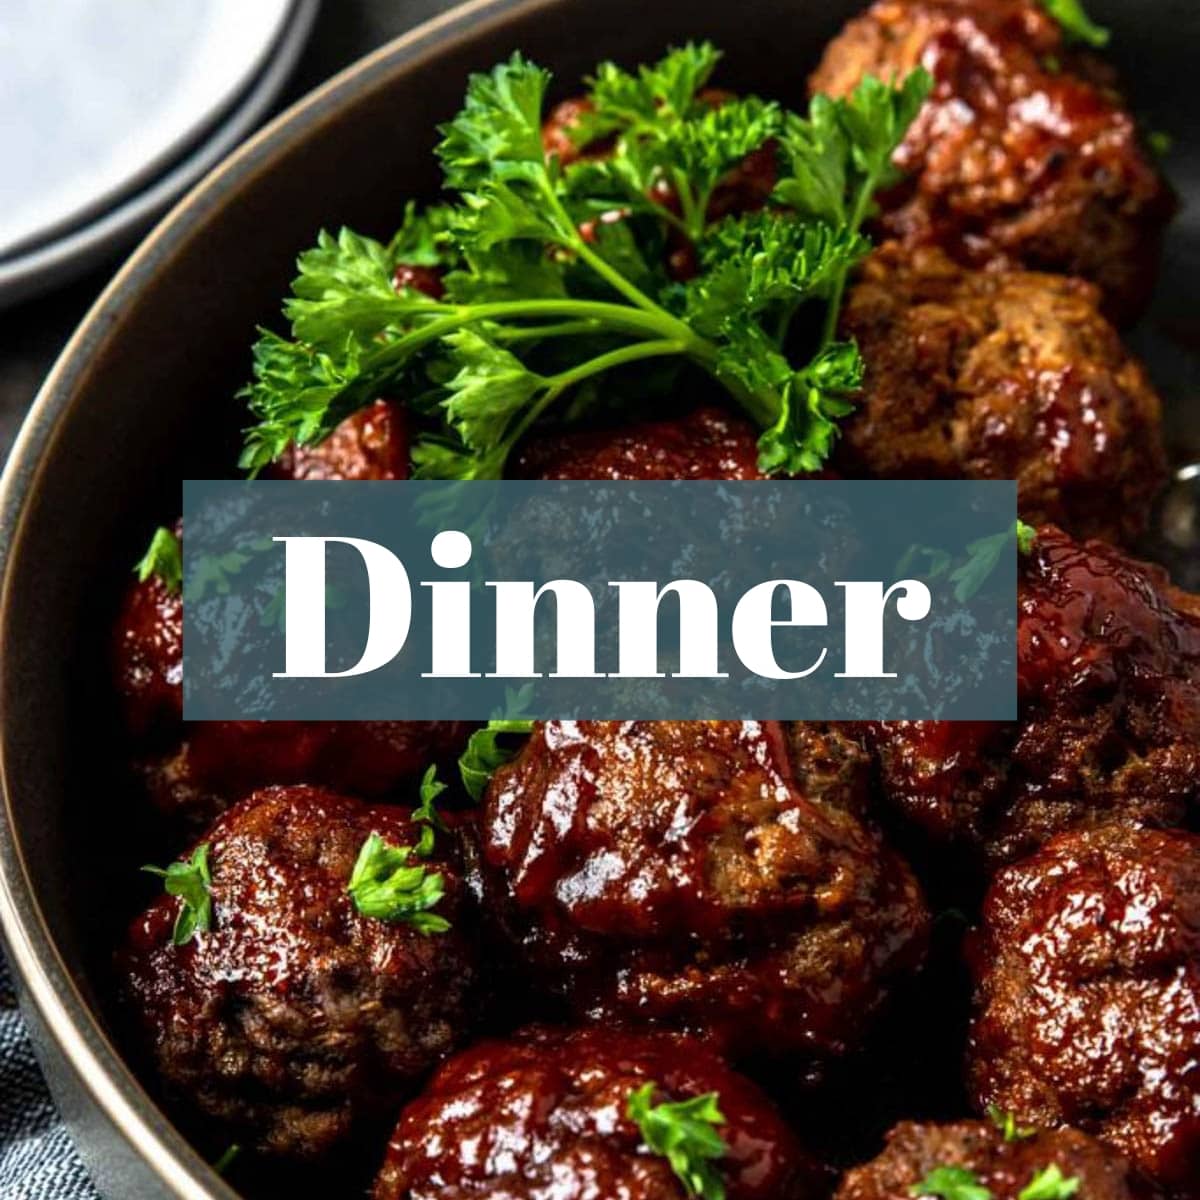 meatballs with text overlay "dinner"